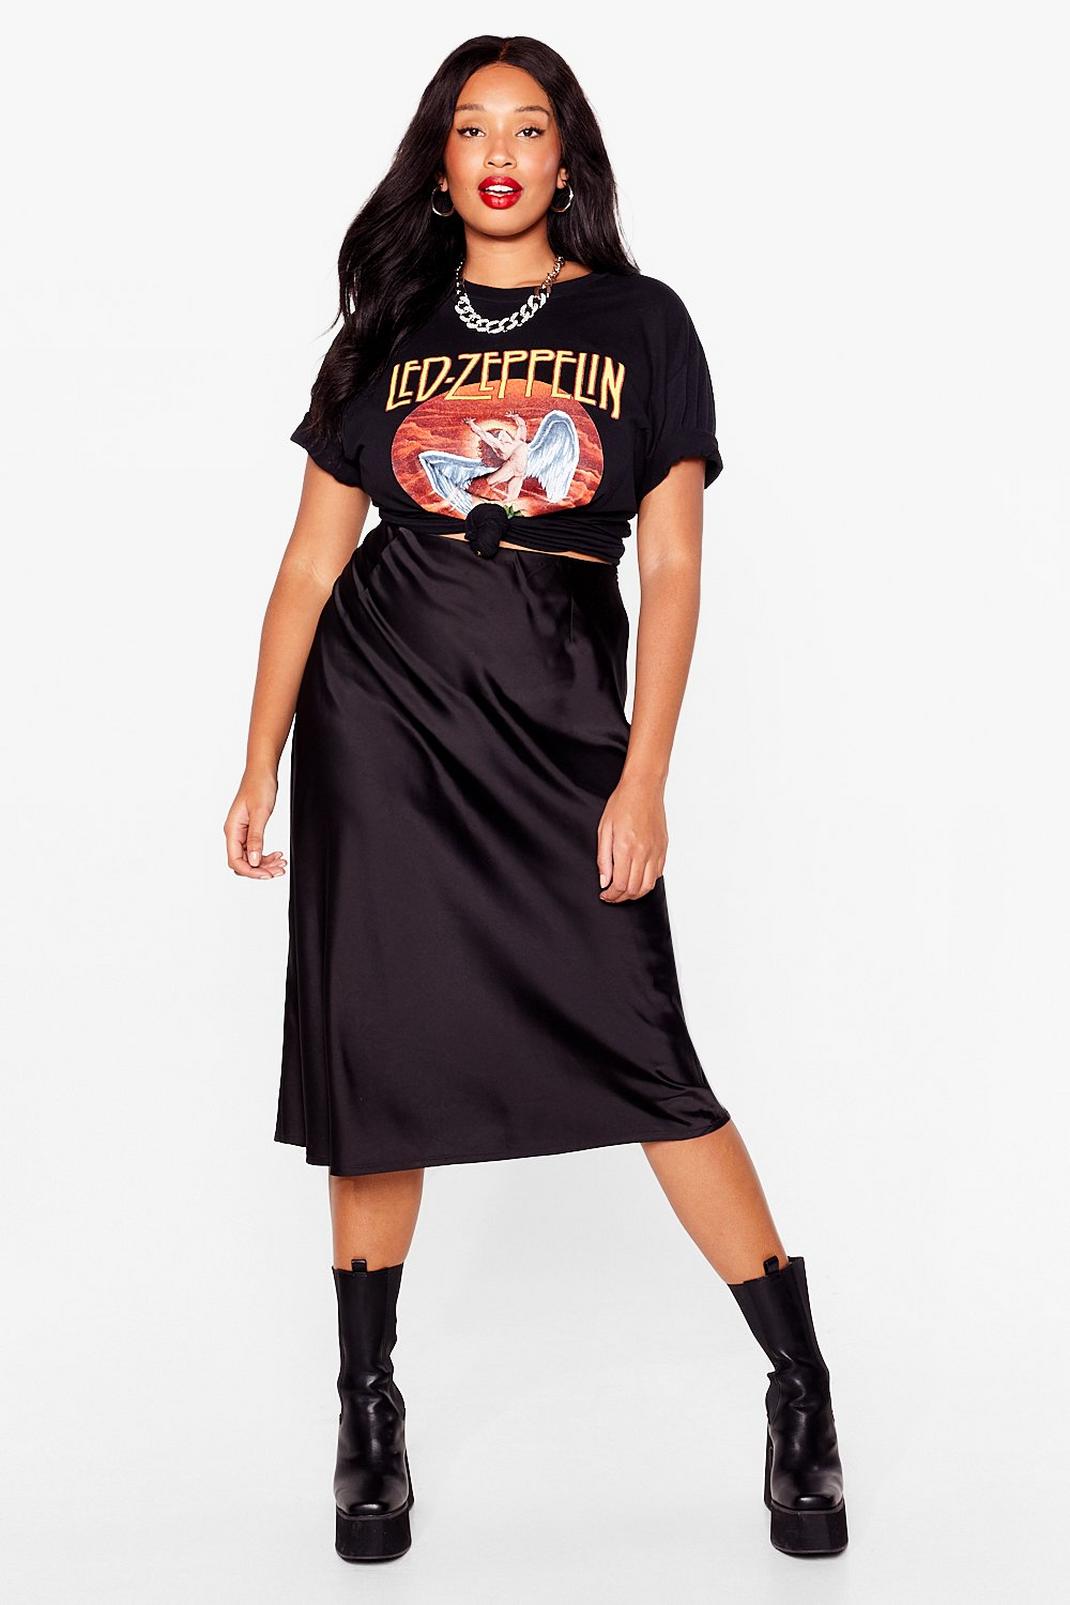 Plus-Size Satin Skirts Shopping Guide